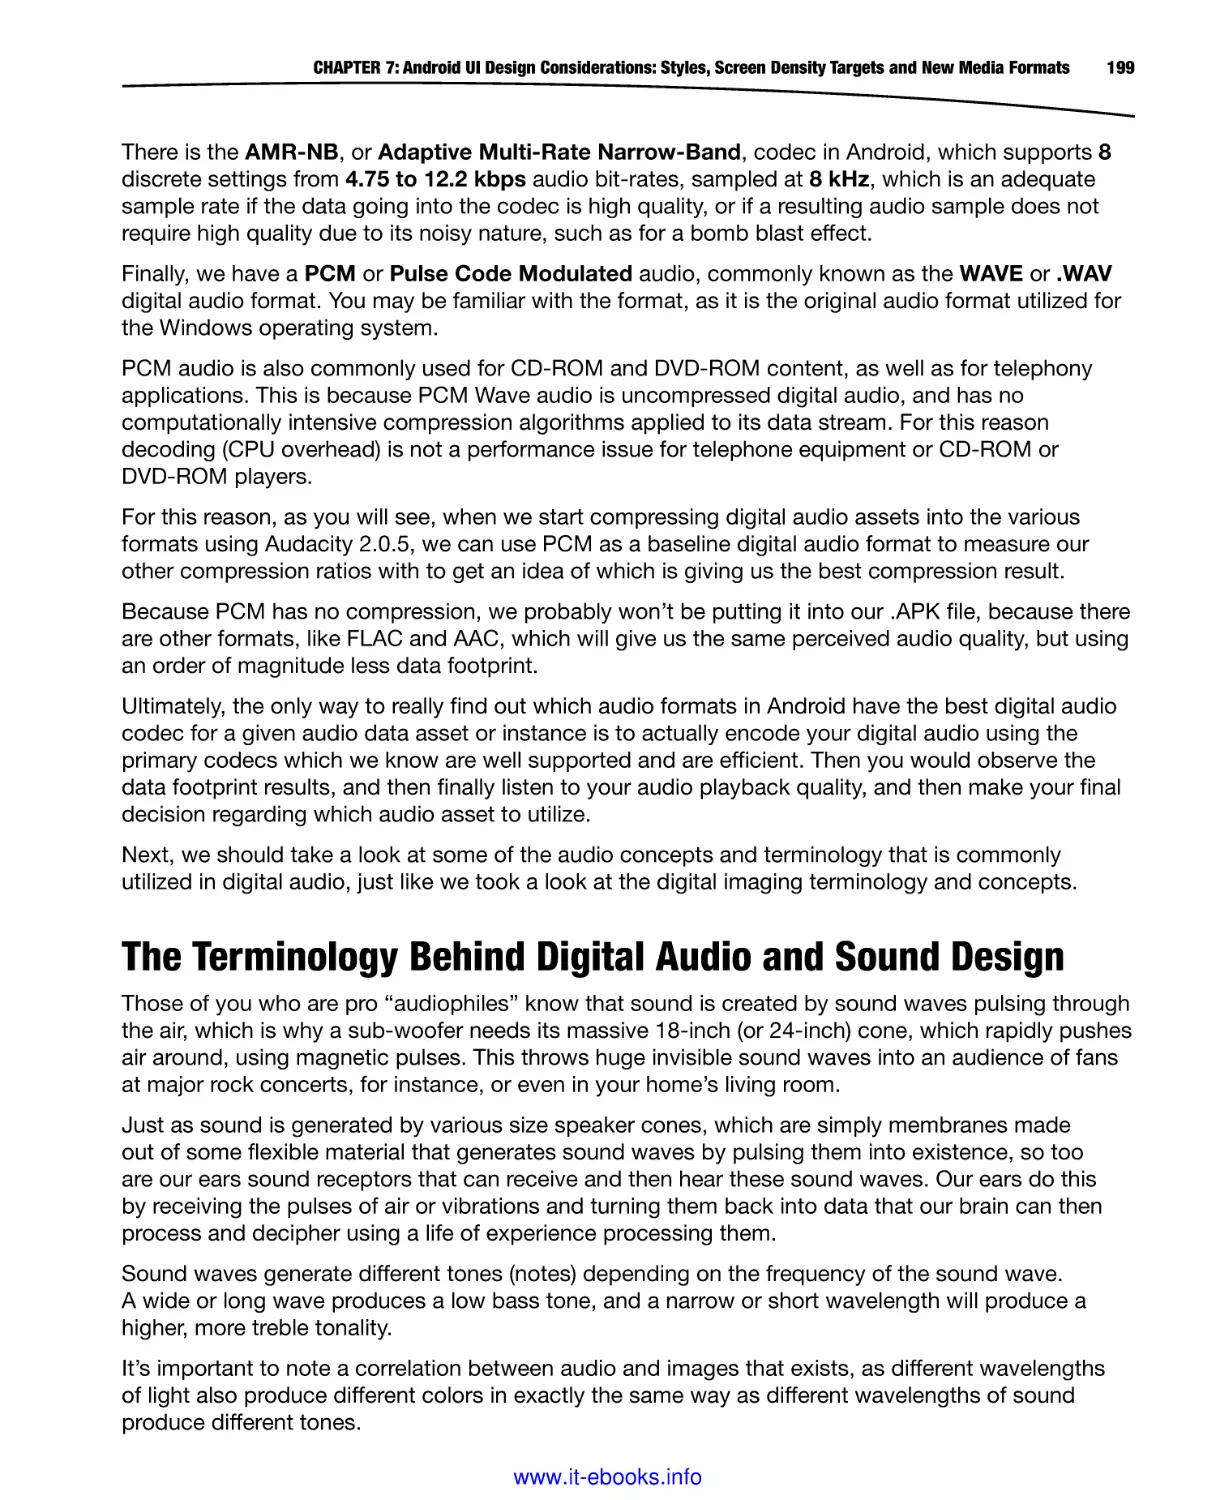 The Terminology Behind Digital Audio and Sound Design